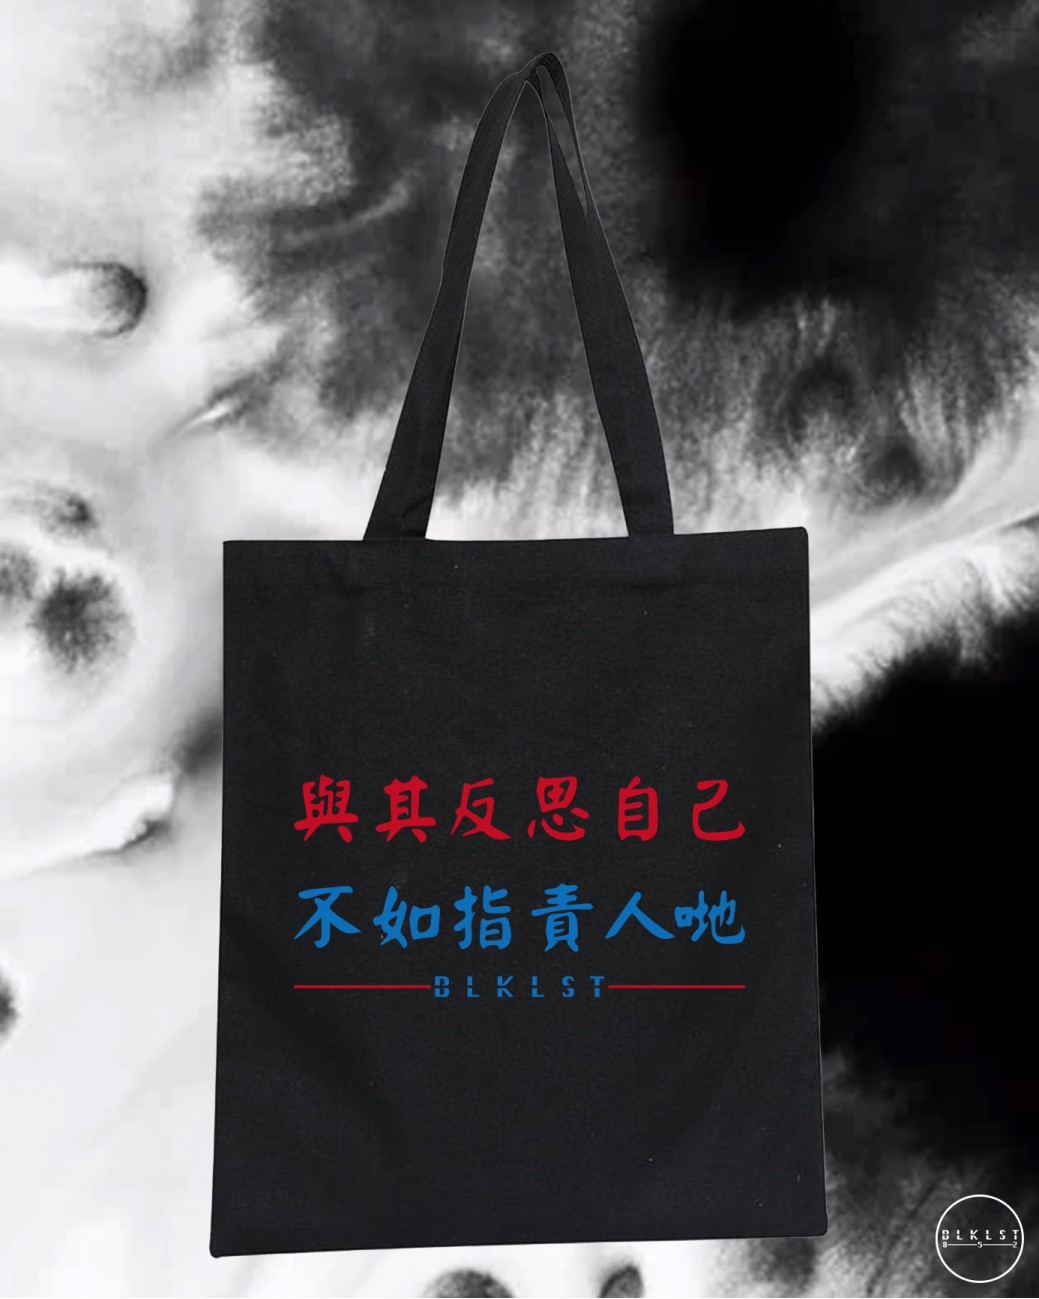 "INSTEAD OF REFLECTING ON YOURSELF , IT IS BETTER TO BLAME OTHERS." TOTE BAG